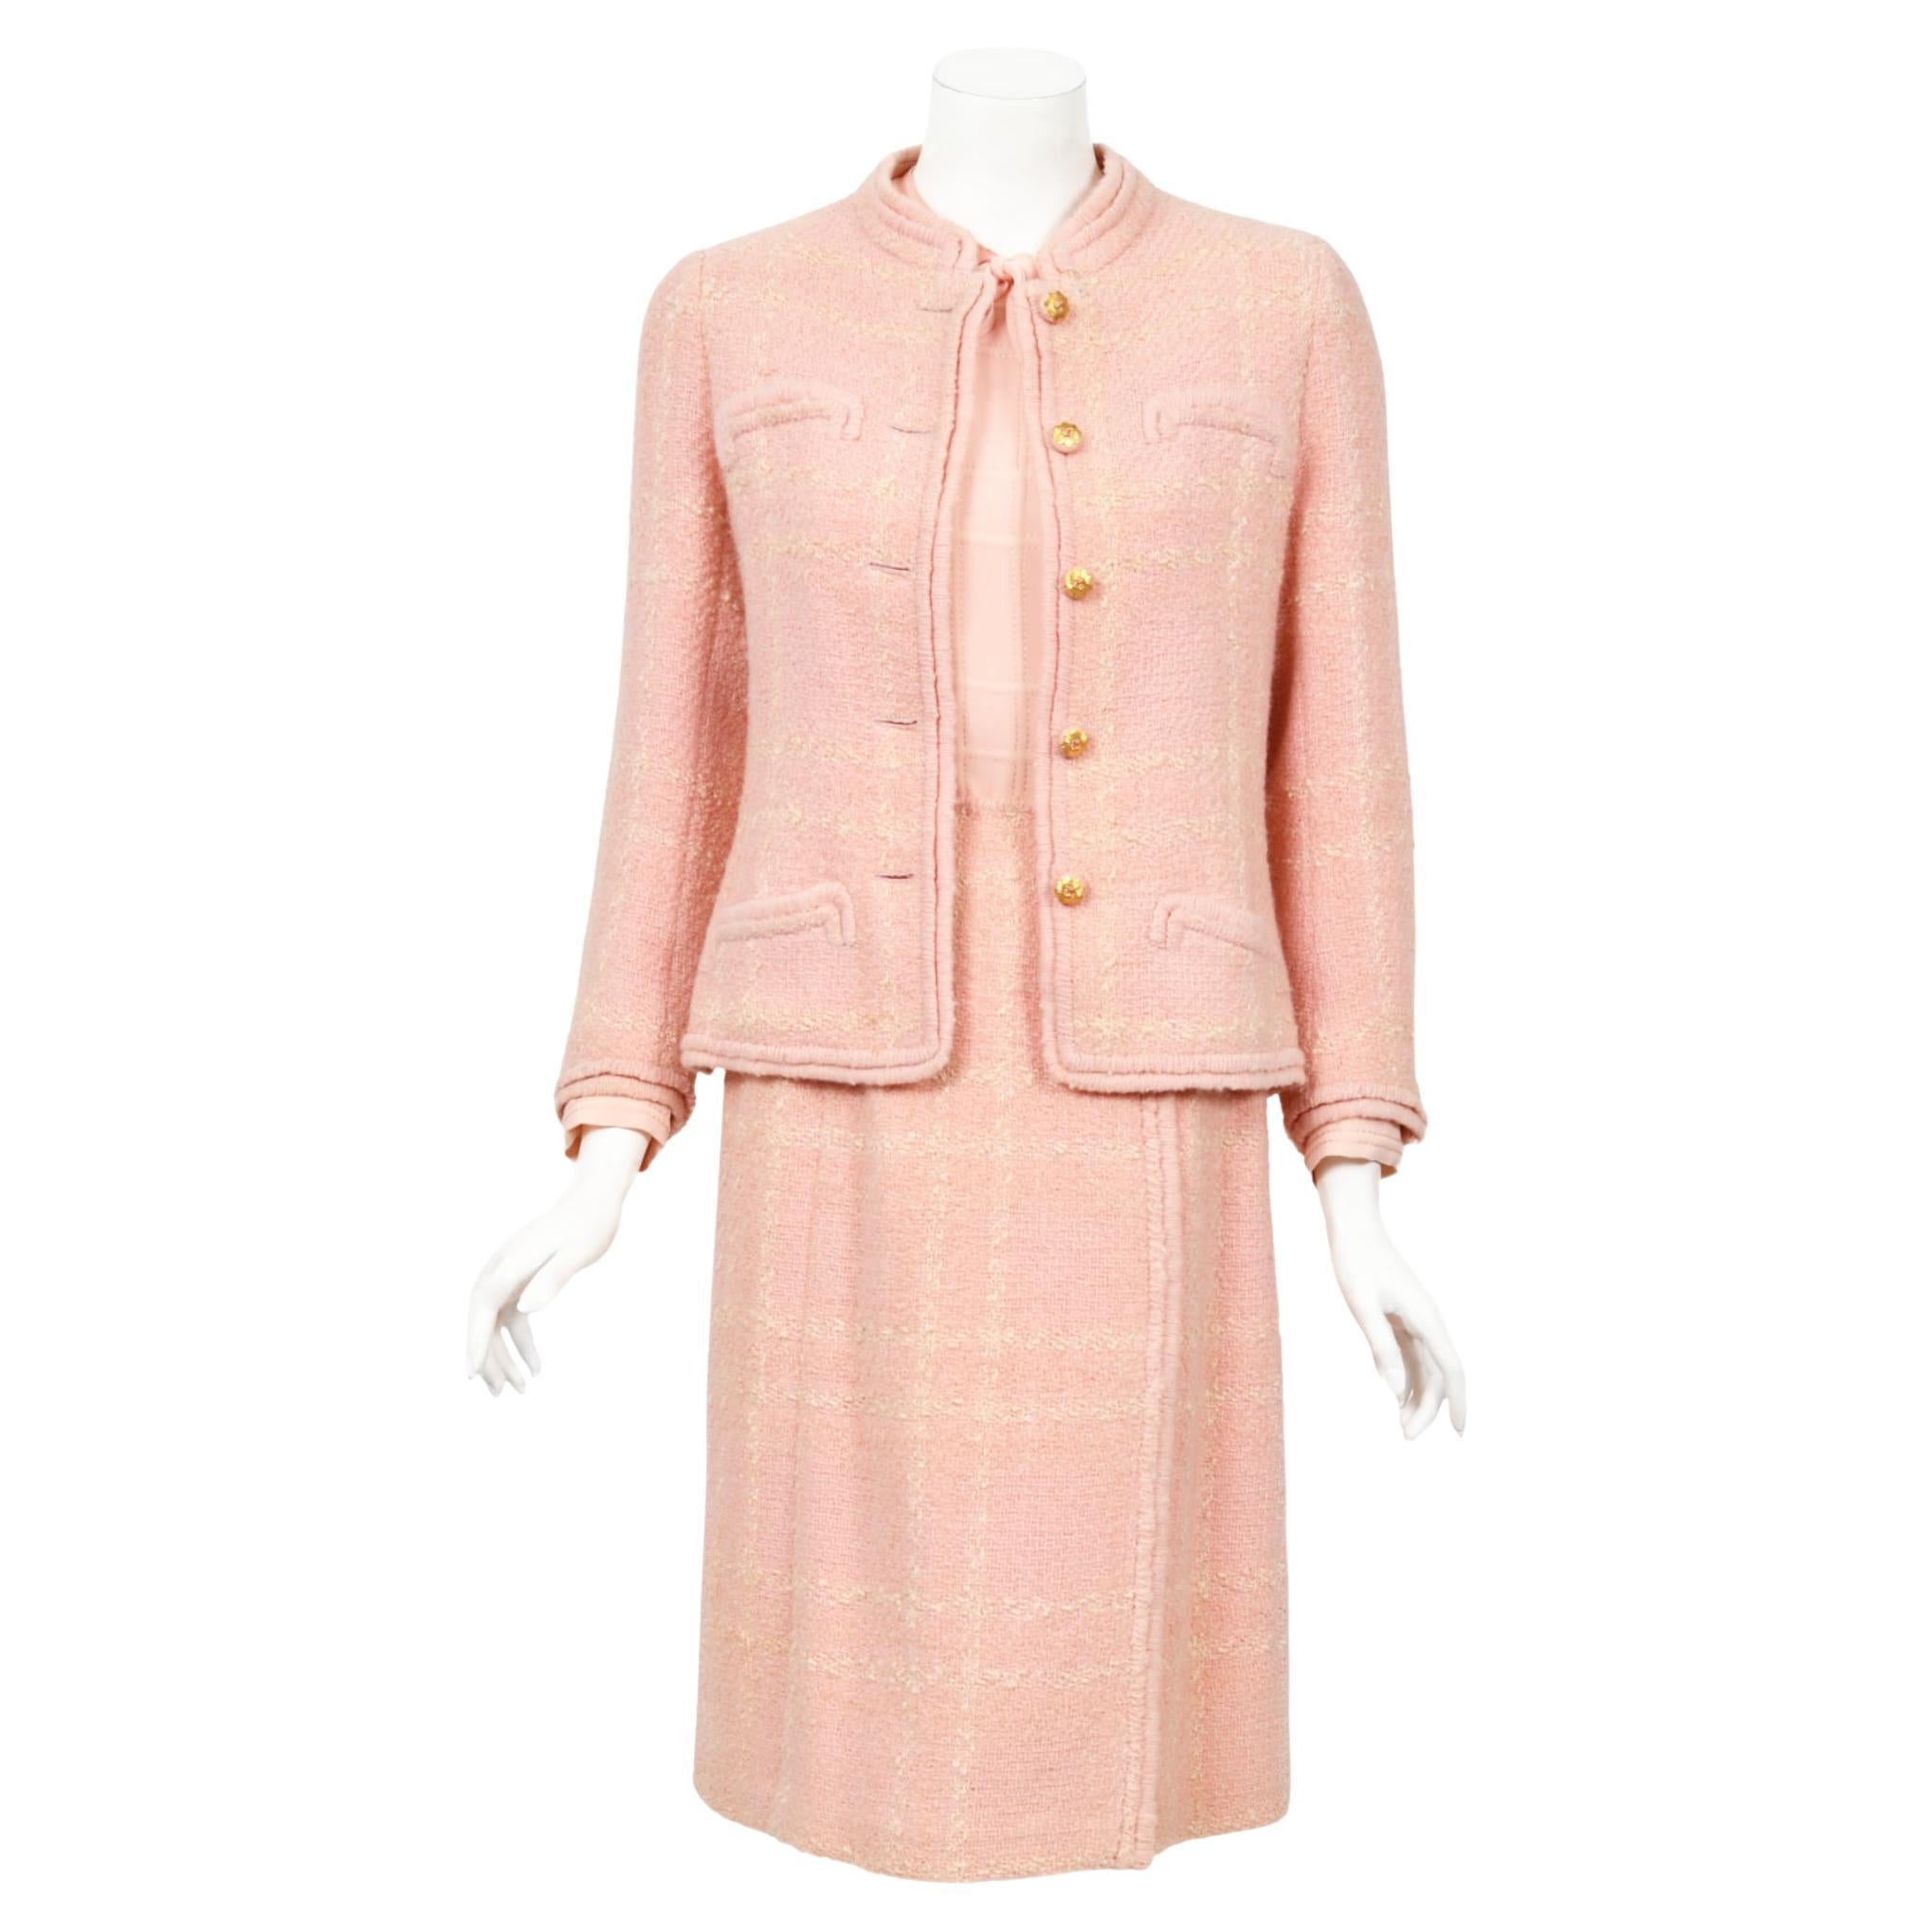 Vintage 1973 Chanel Haute Couture Documented Pink Wool Jacket Blouse Skirt Suit For Sale